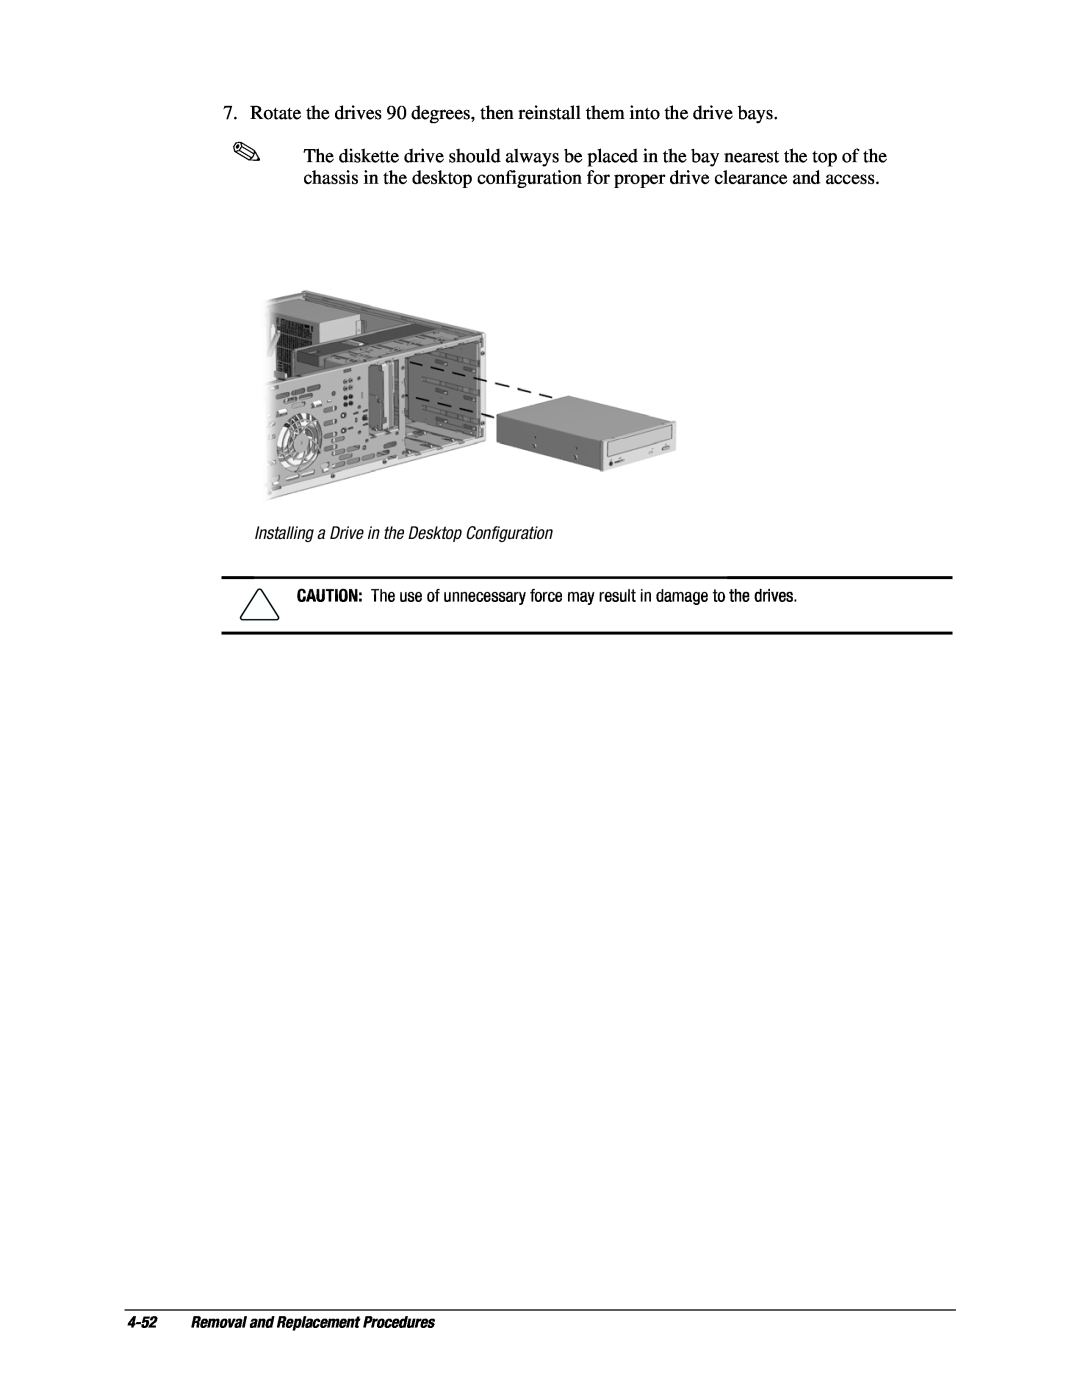 Compaq EP Series manual Installing a Drive in the Desktop Configuration, Removal and Replacement Procedures 